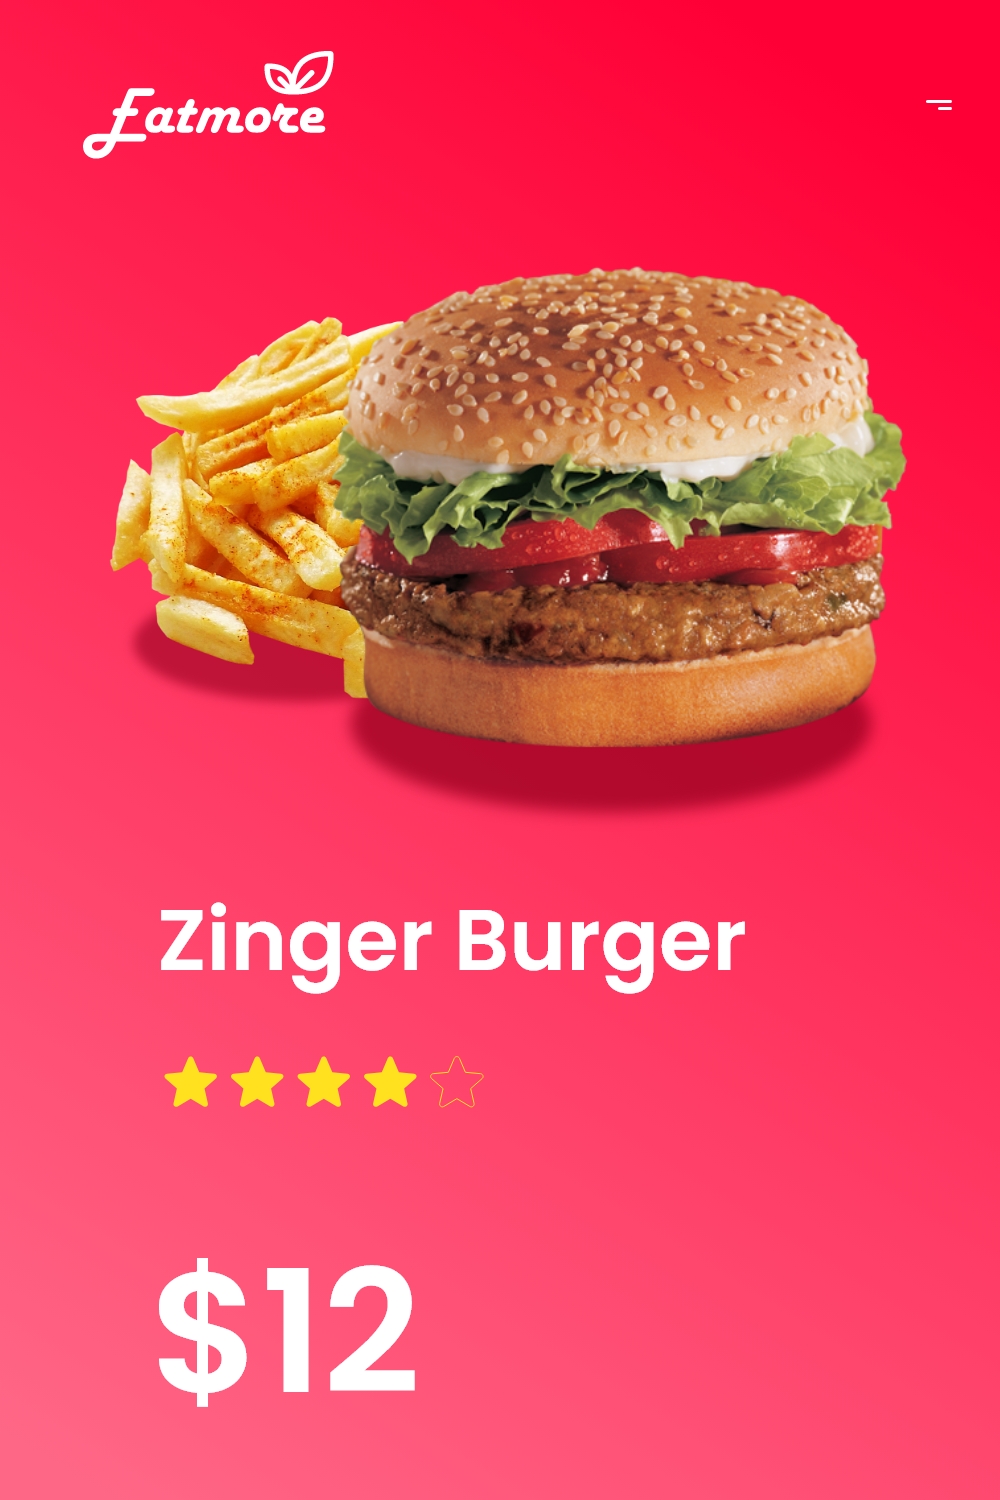 Hamburger and fries are on a pink background.